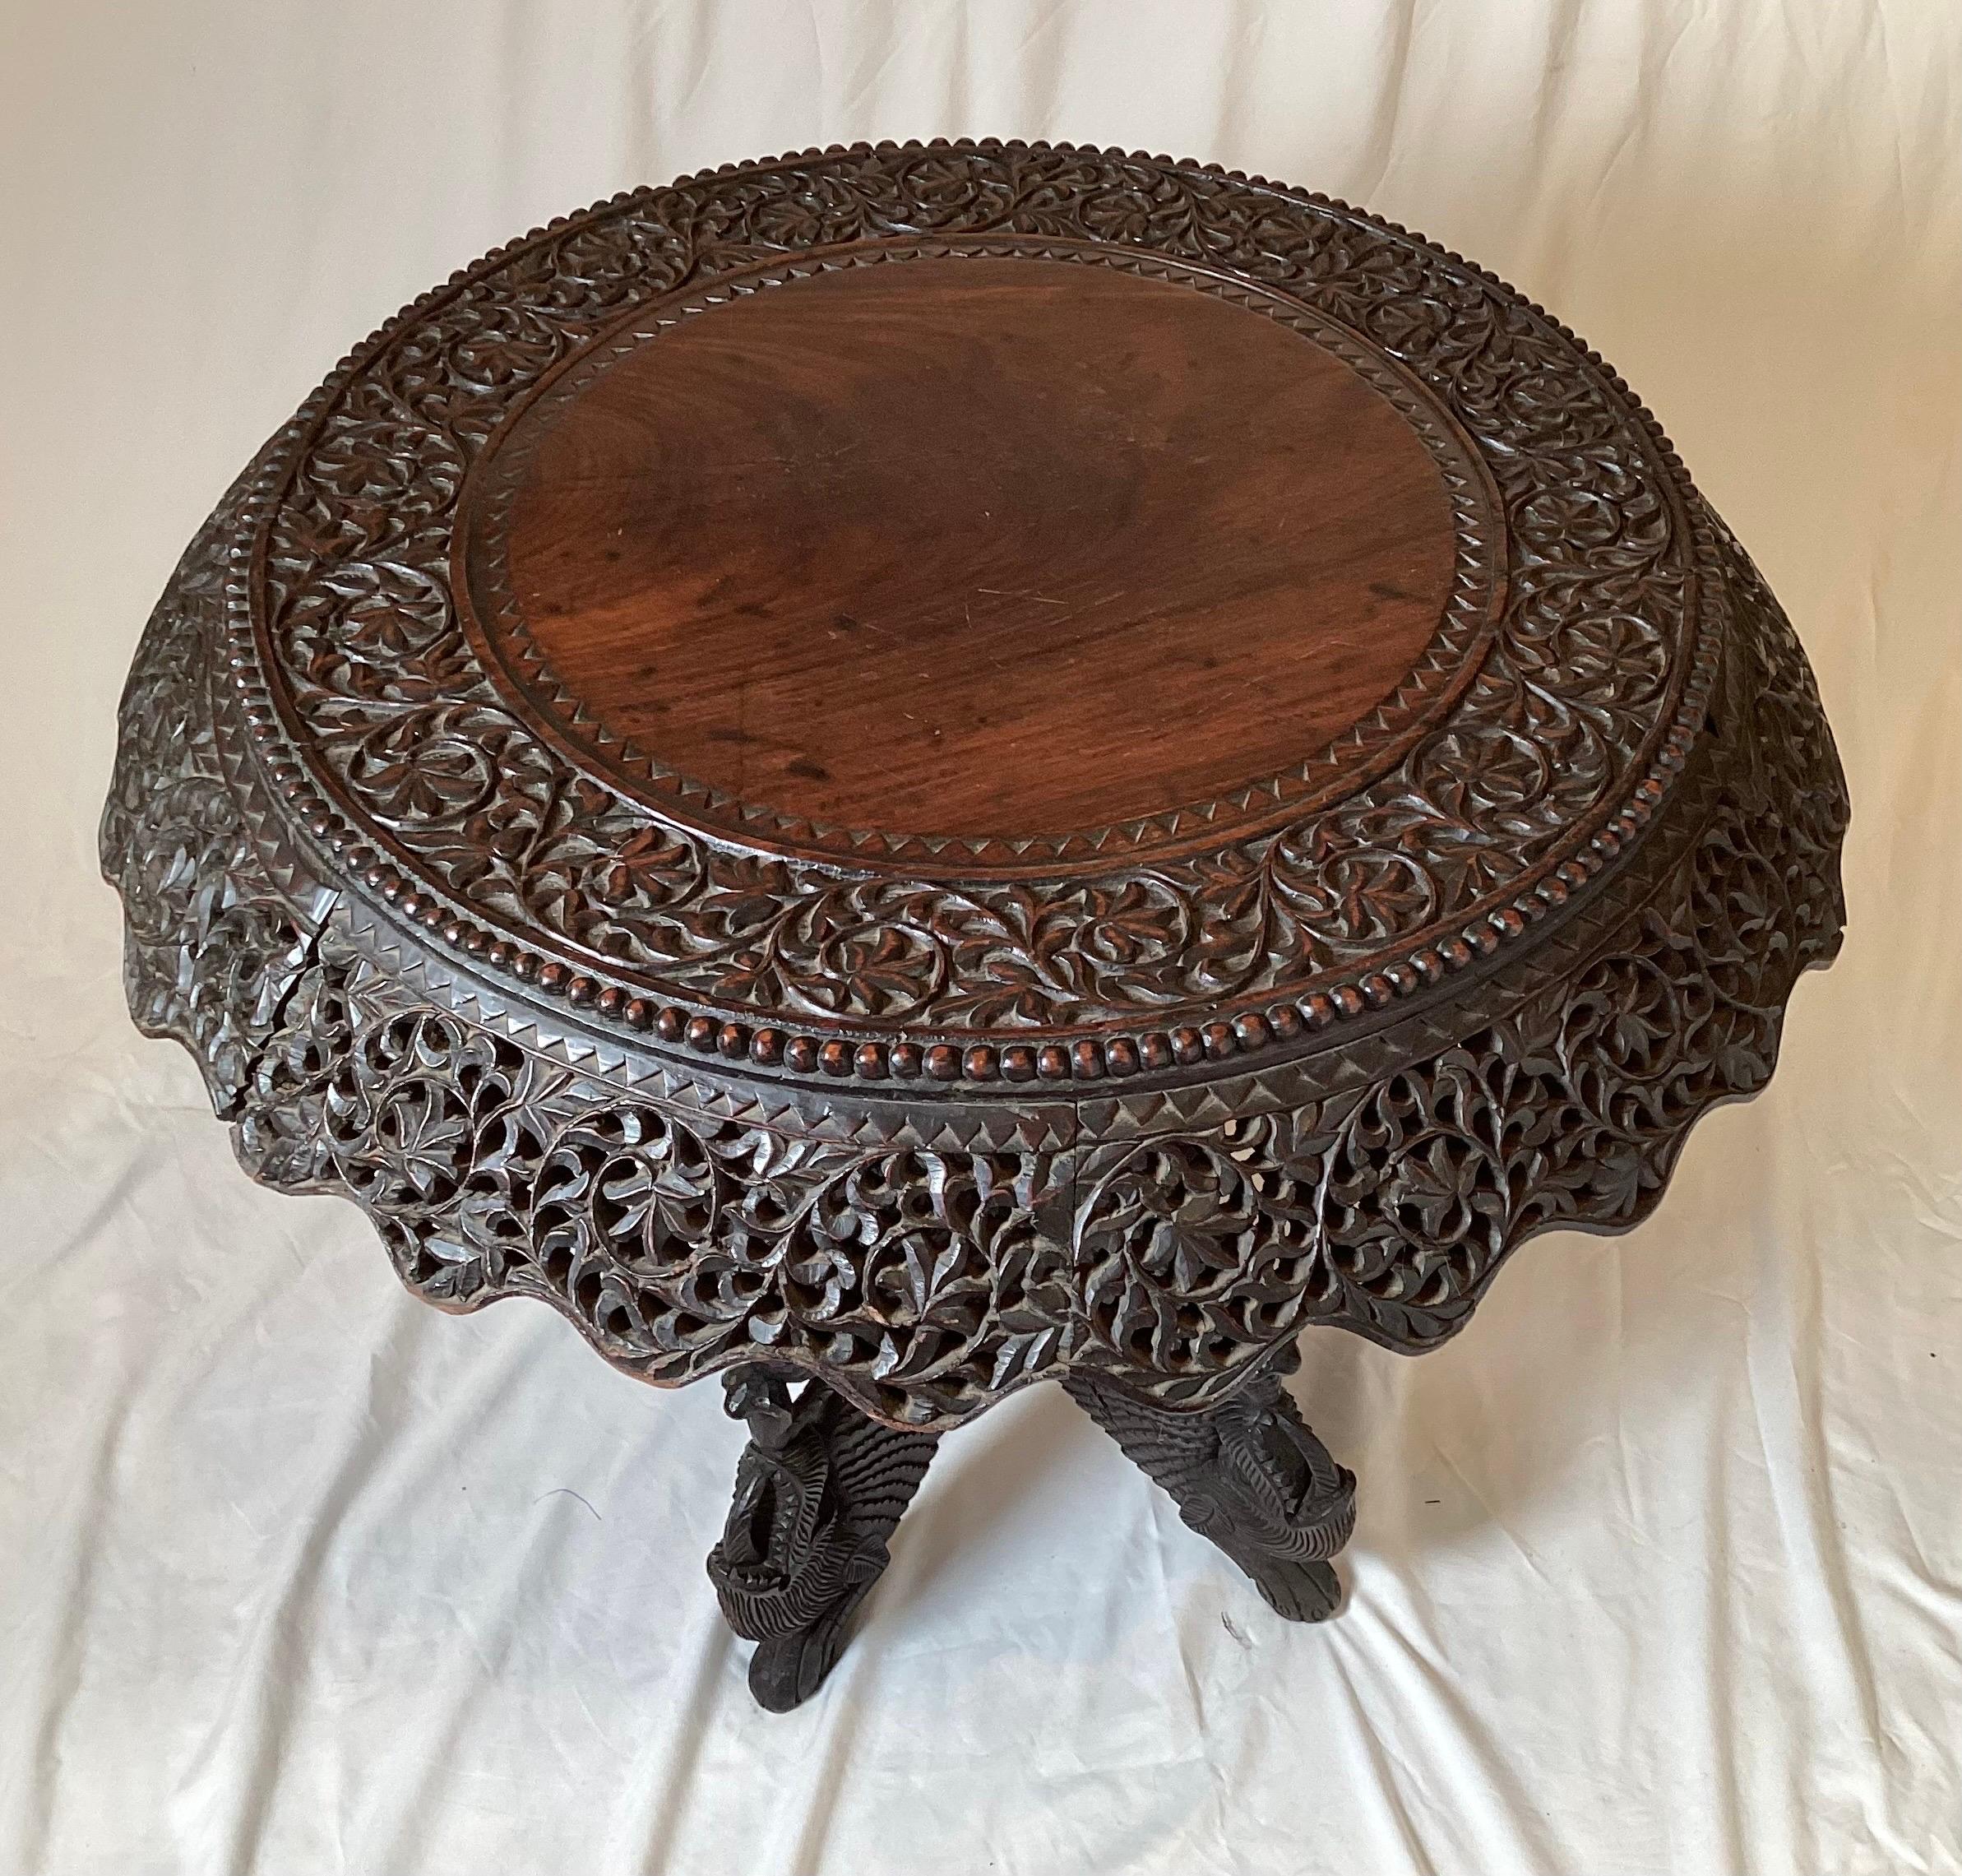 Elaborate hand carved round Anglo Indian table. The round top with faired and reticulated apron which revolves on the hand carved serpent motif base. The dark wood with a rich aged patination. Circa 1900, 27.5 in diameter, 27 high.